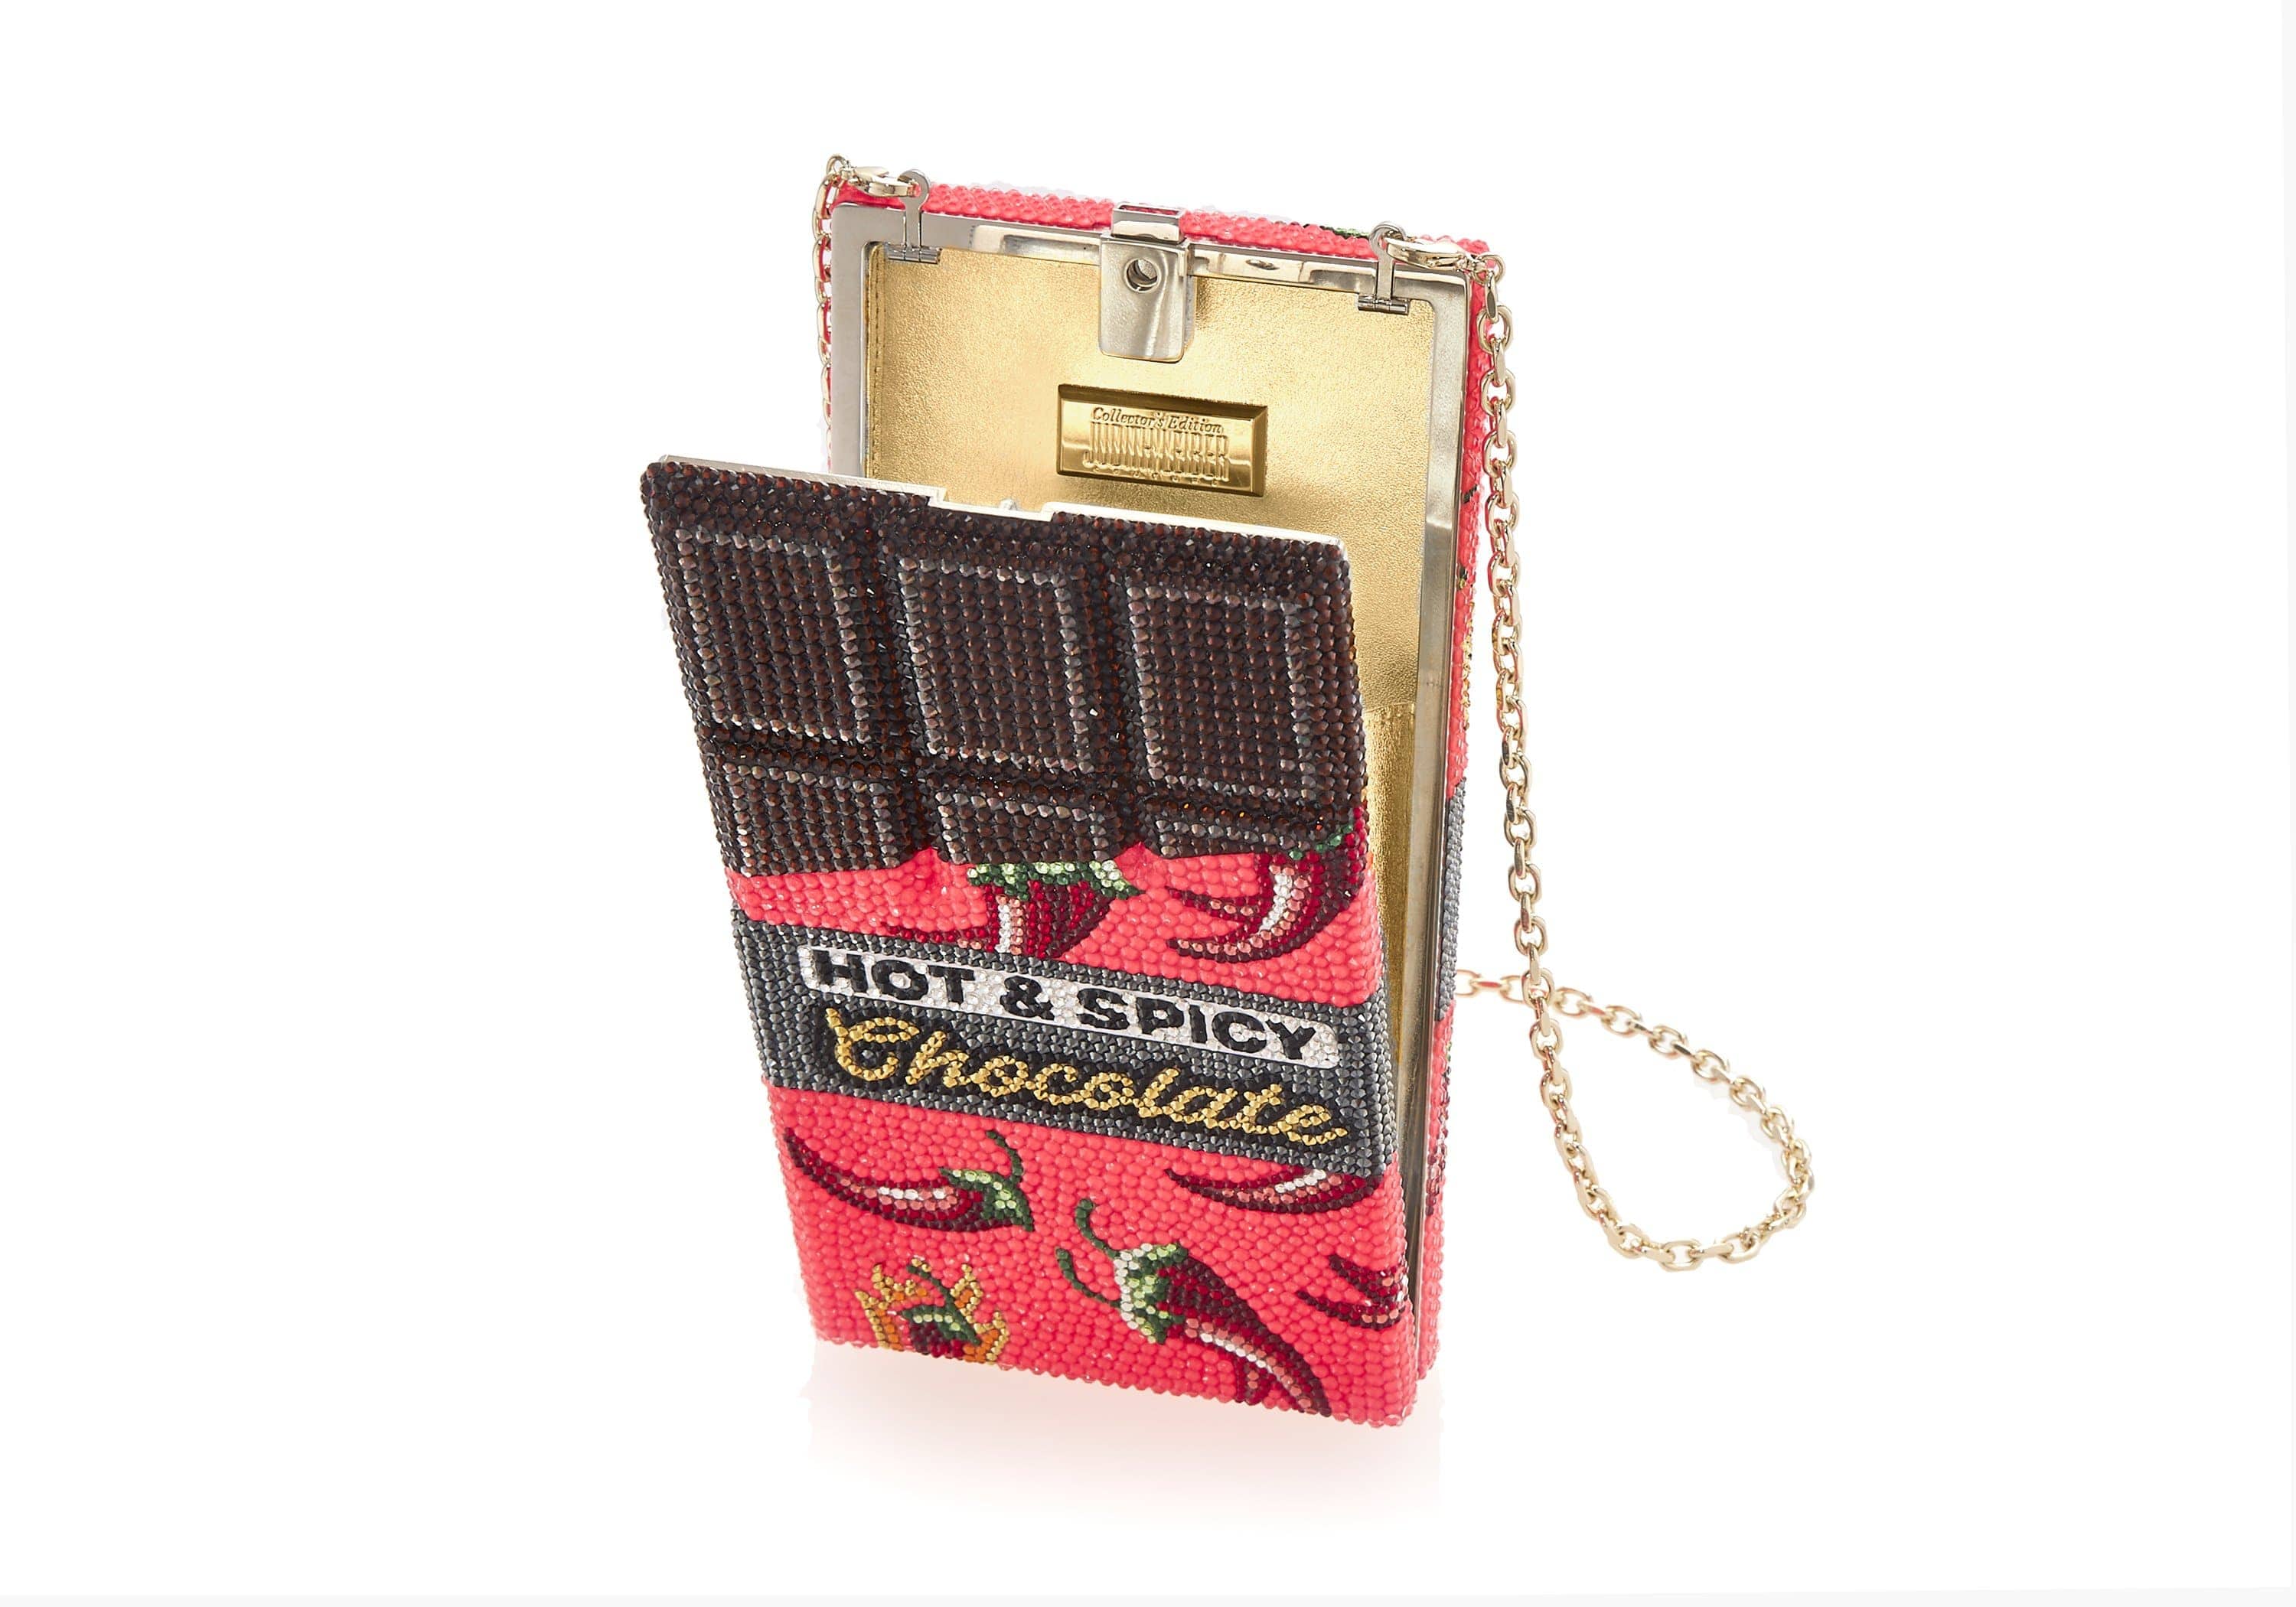 Judith Leiber Hot and Spicy Candy Bar